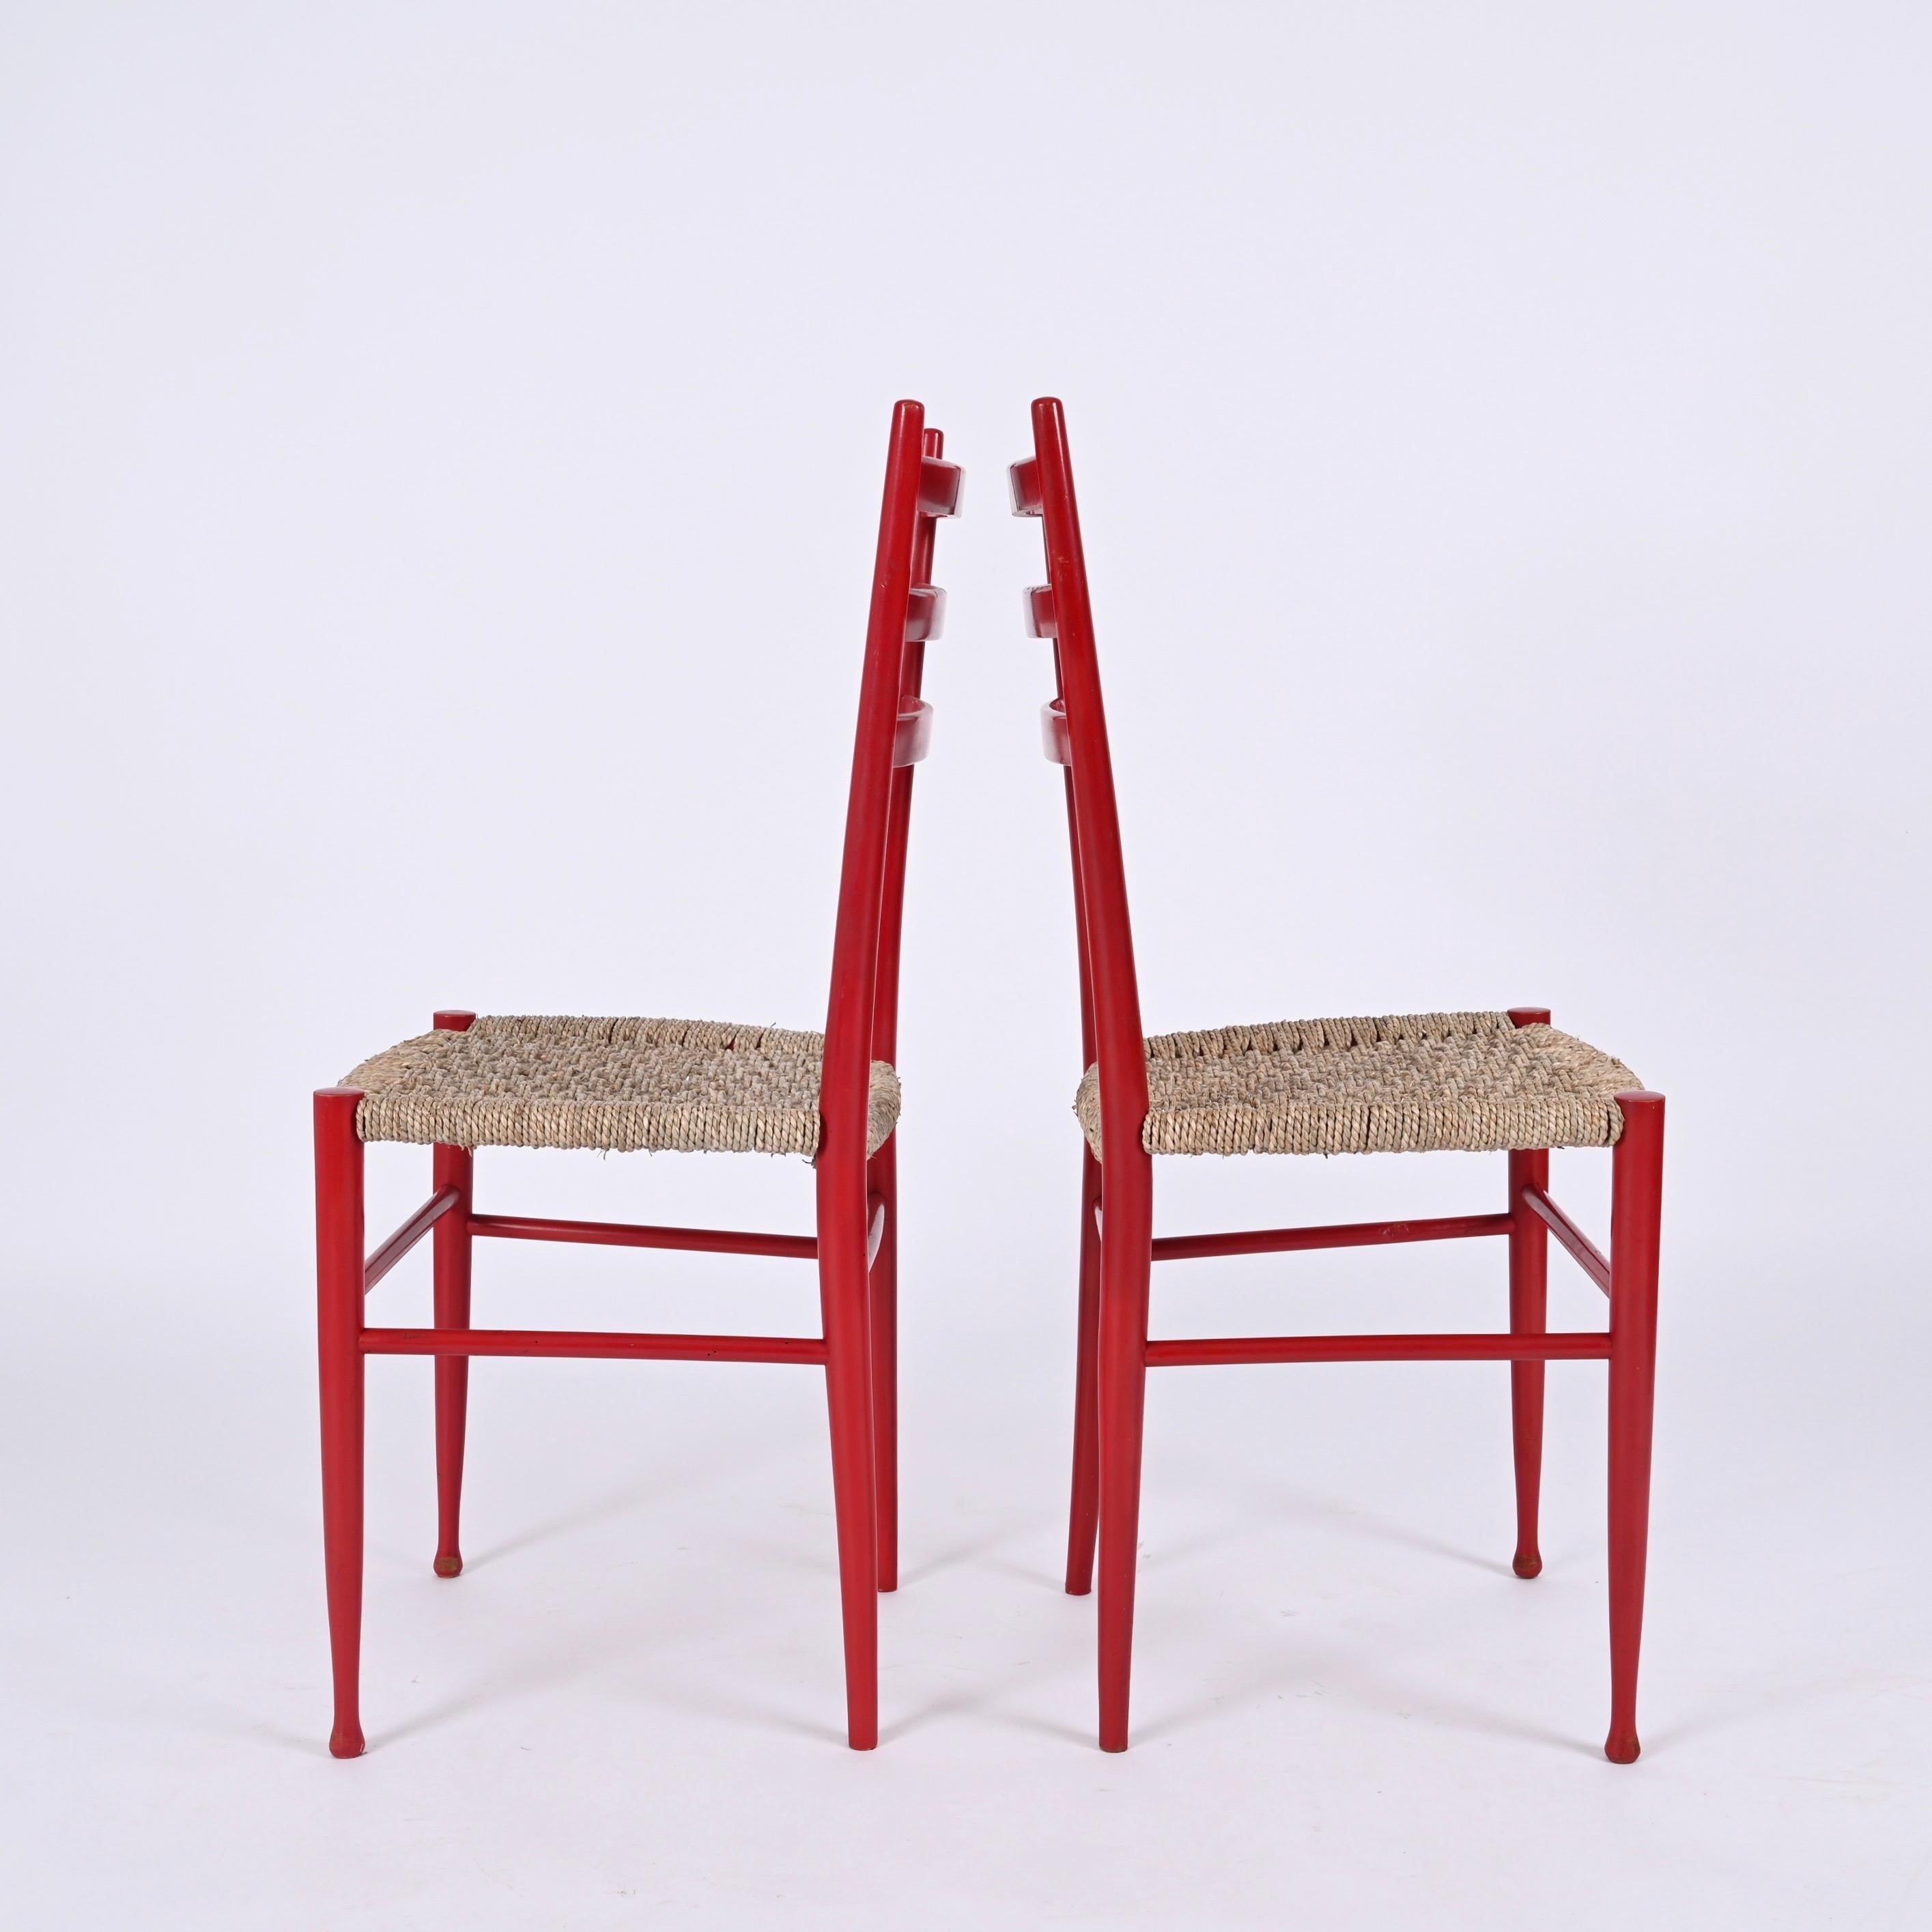 Set of 4 Chiavarine Chairs in Red Stained Beech and Bamboo Rope, Italy 1950s For Sale 2